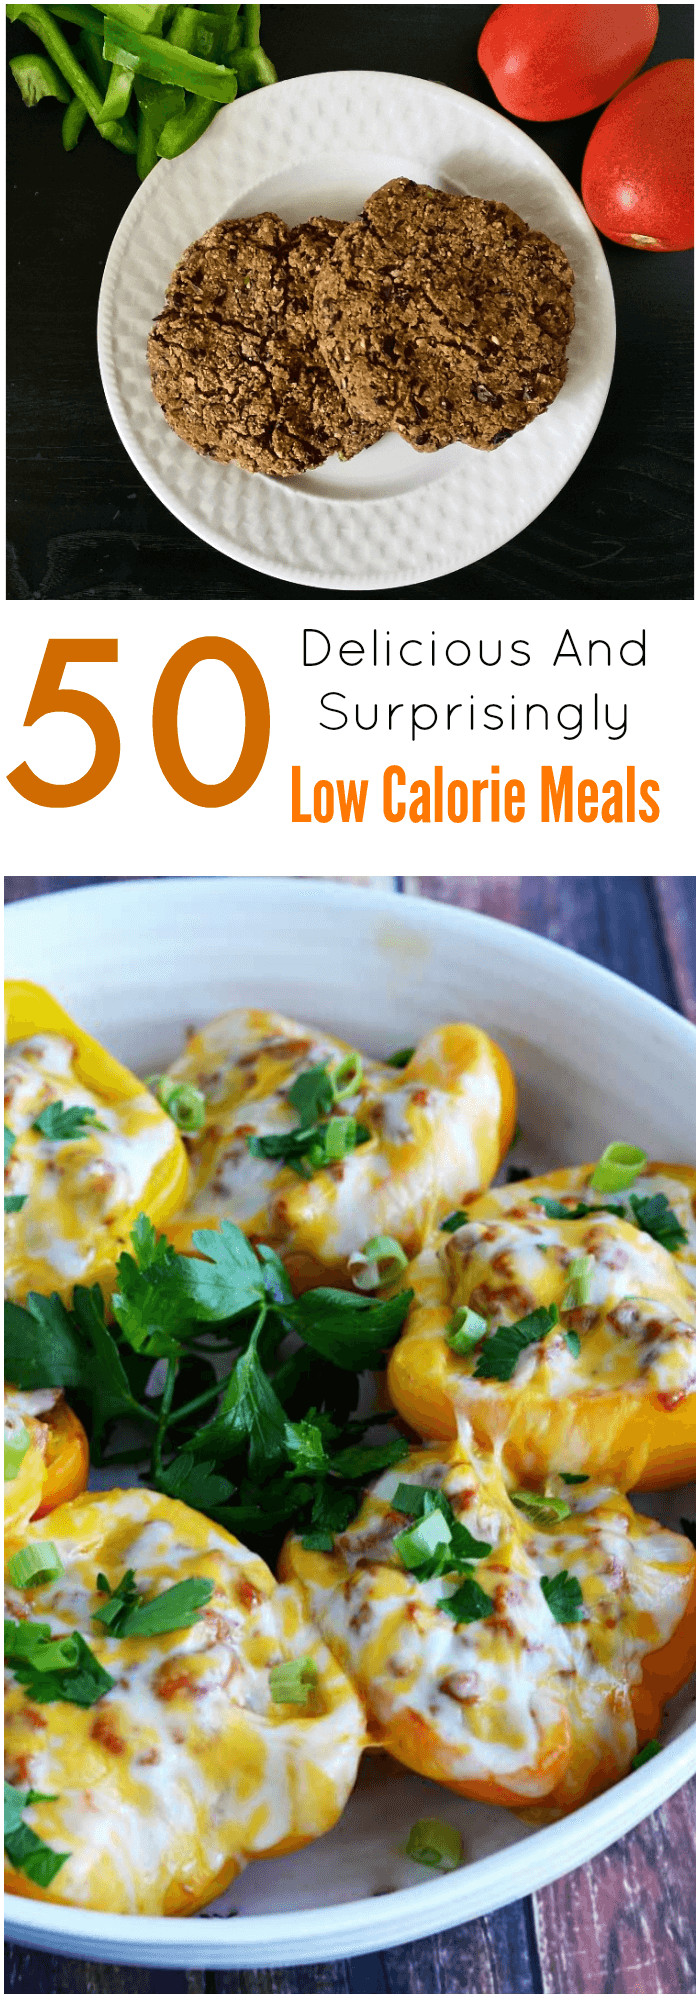 Low Calorie Vegetarian Dinner Recipes
 50 Delicious And Surprisingly Low Calorie Meals